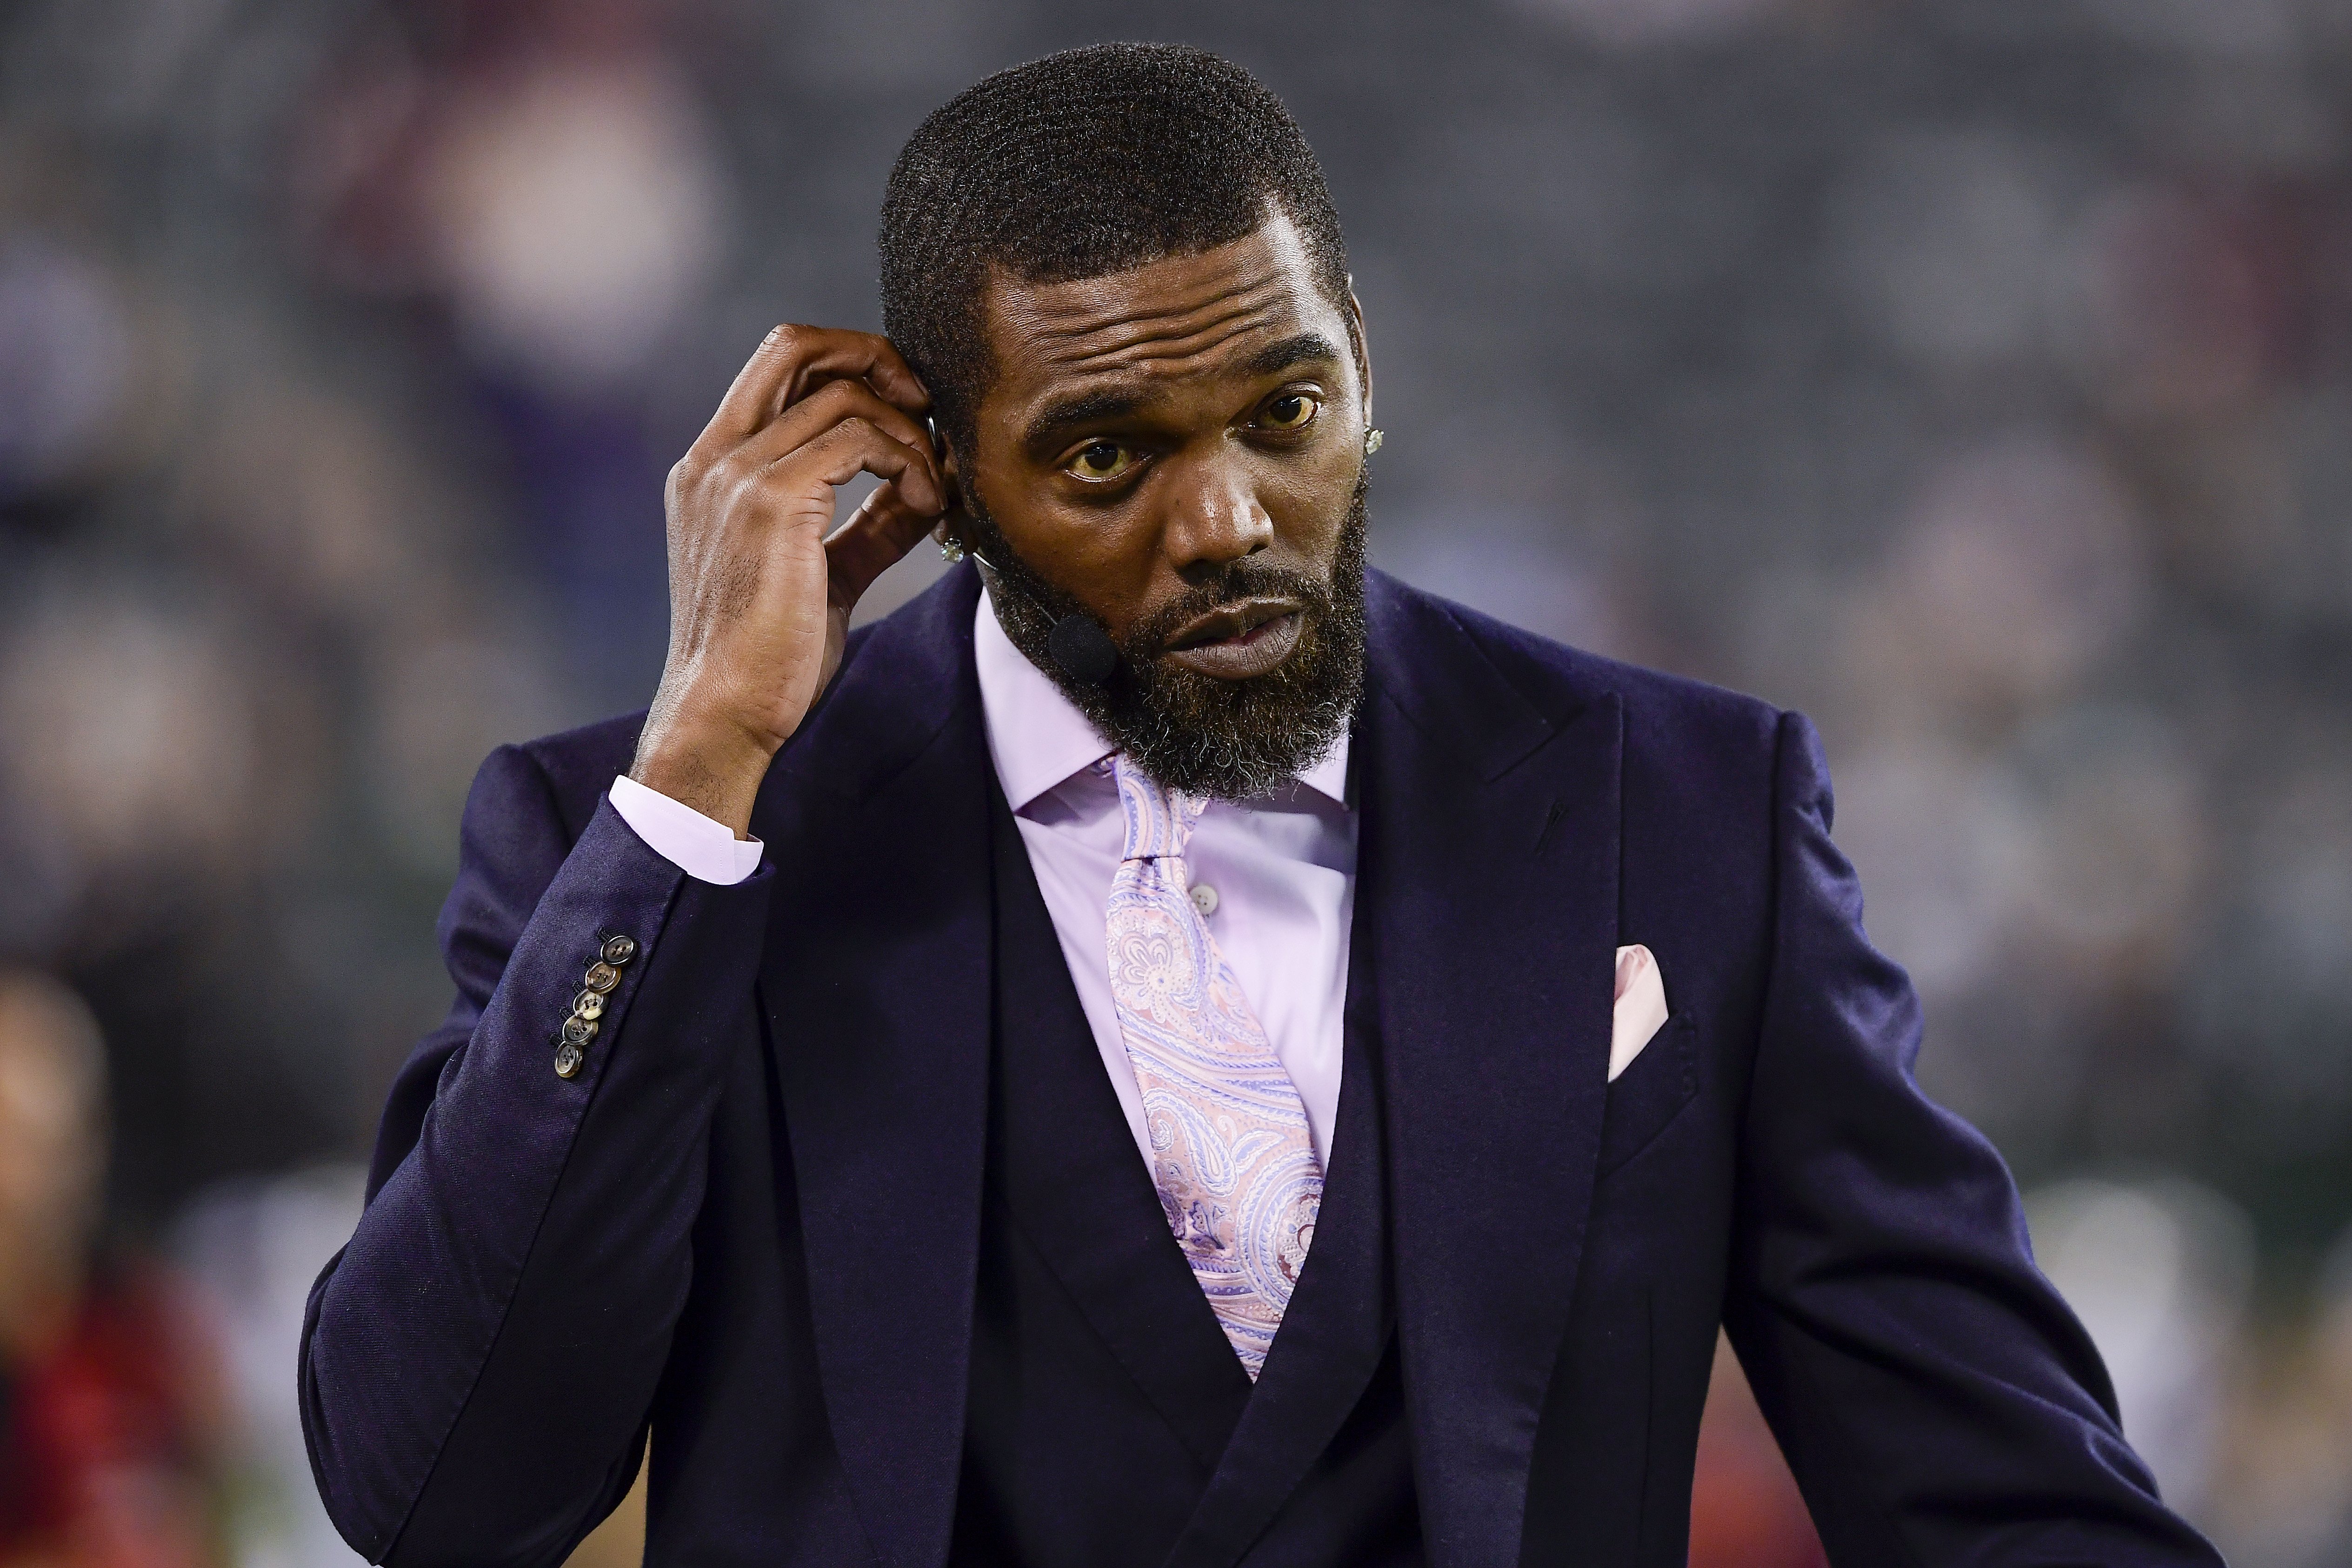 Randy Moss at MetLife Stadium on October 21, 2019. I Image: Getty Images.